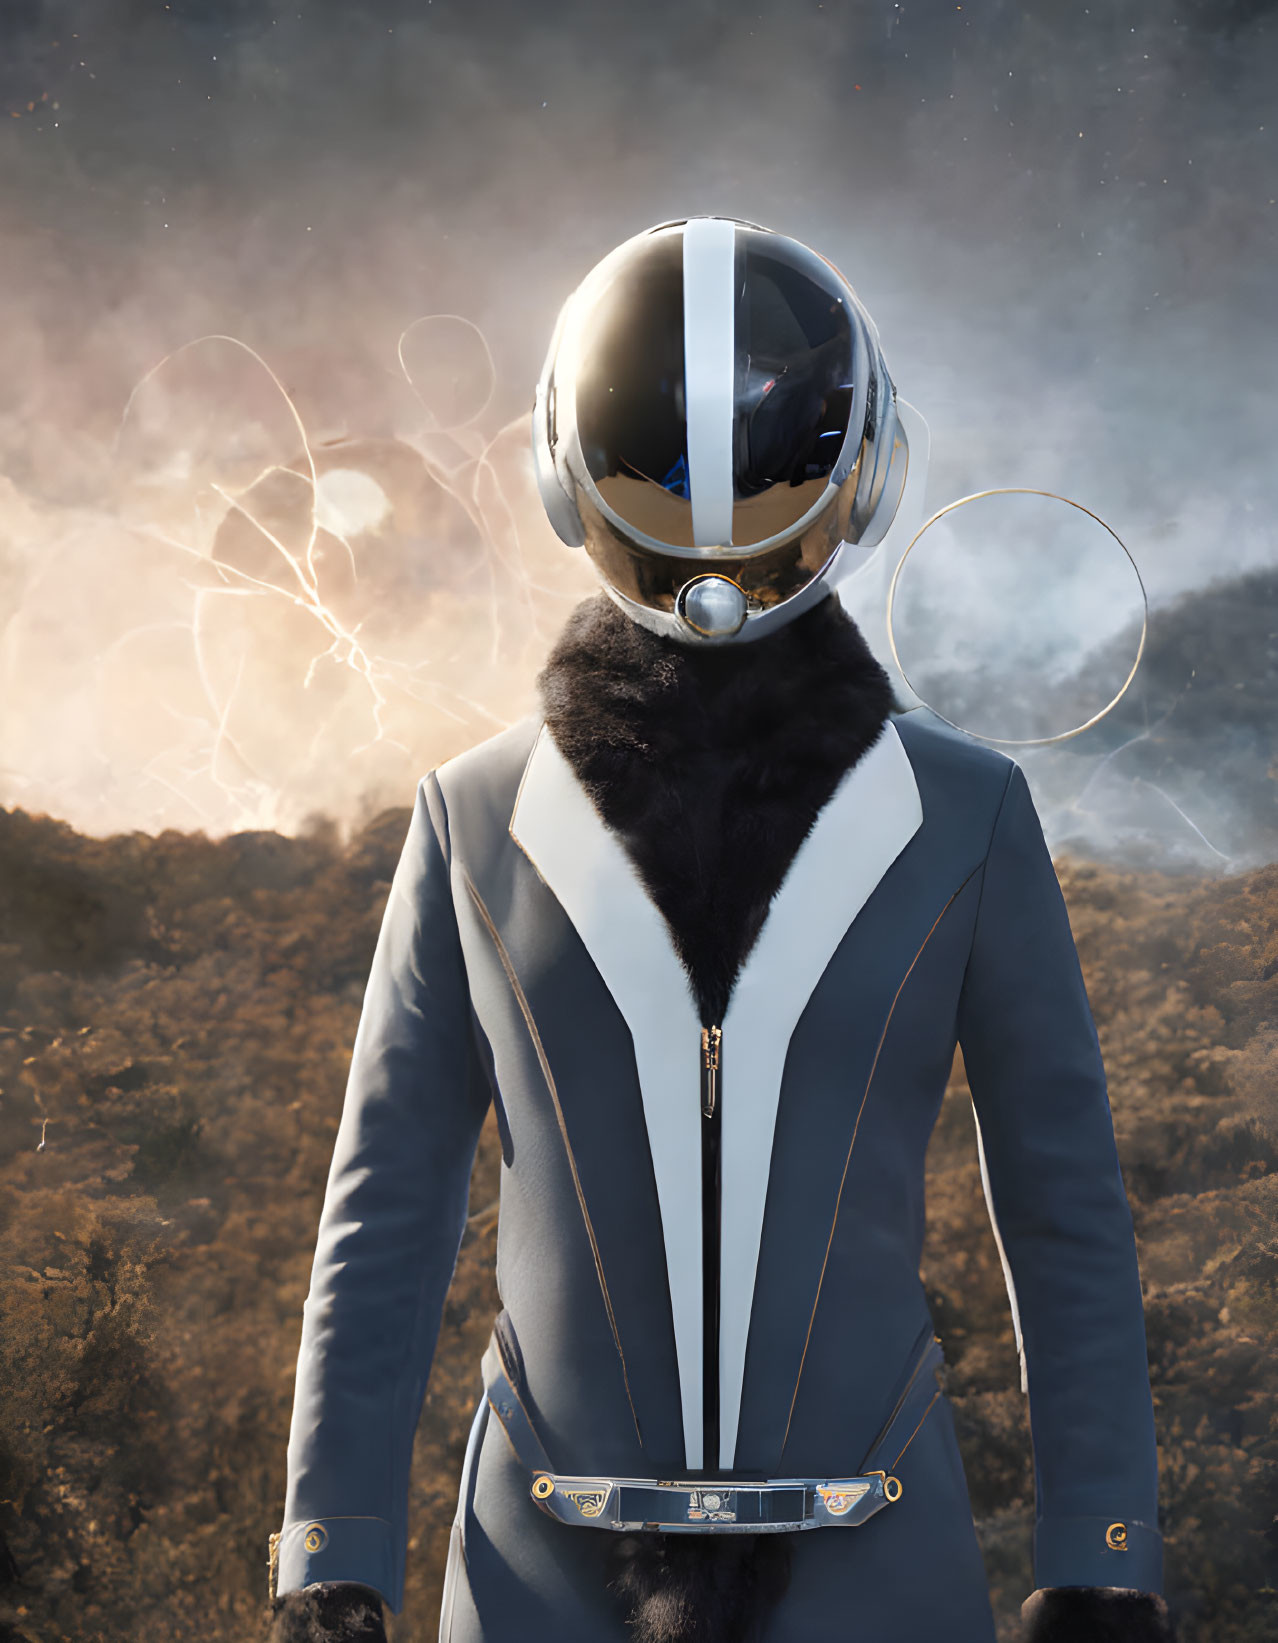 Futuristic spacesuit with reflective helmet against dramatic skies and fiery landscape